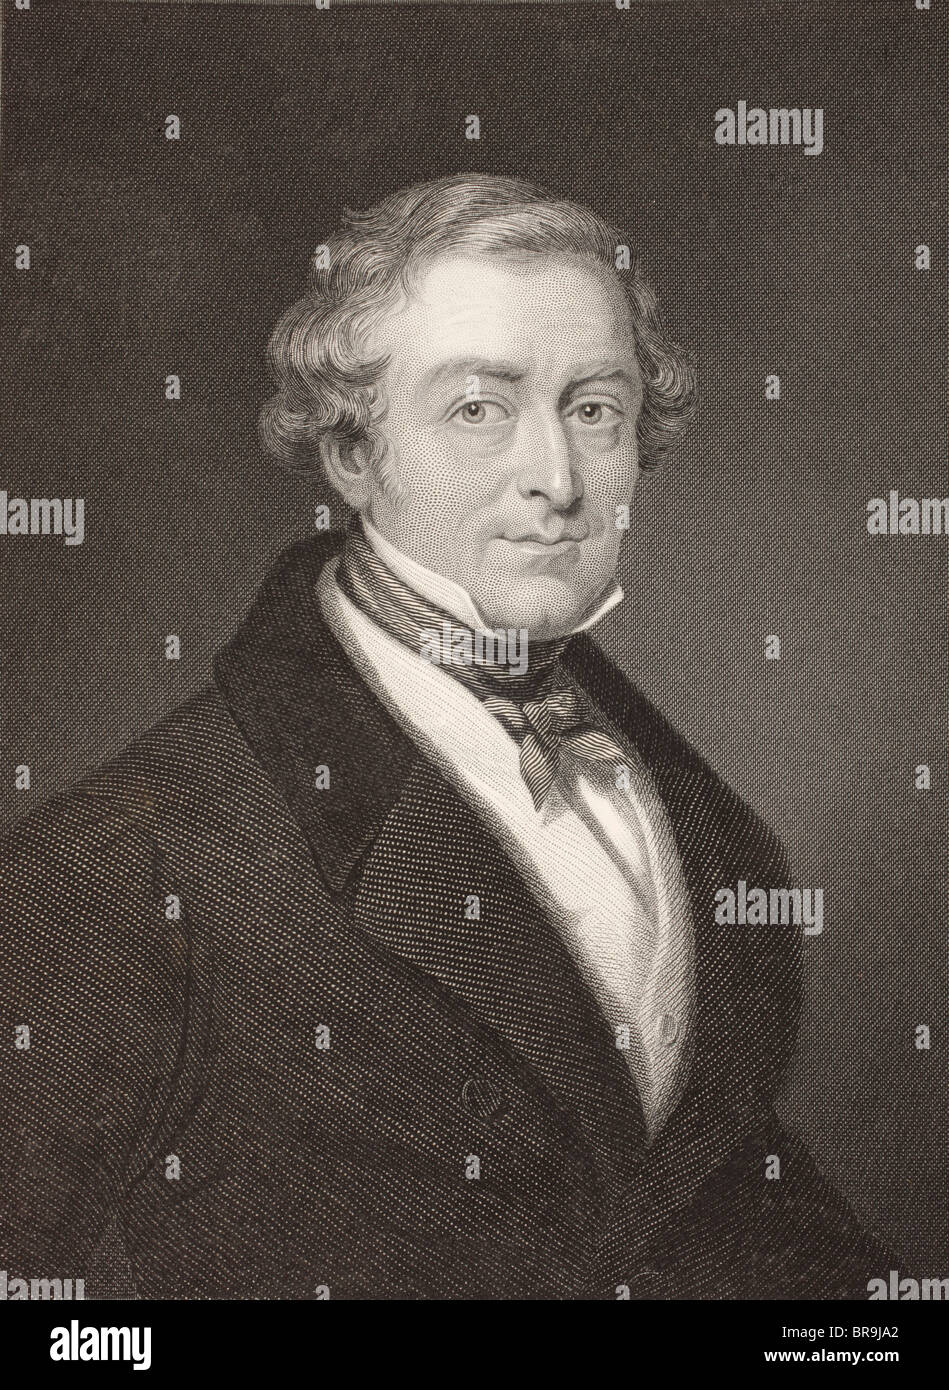 Sir Robert Peel, 2nd Baronet, 1788 to 1850. British Conservative statesman, twice Prime Minister of the United Kingdom. Stock Photo